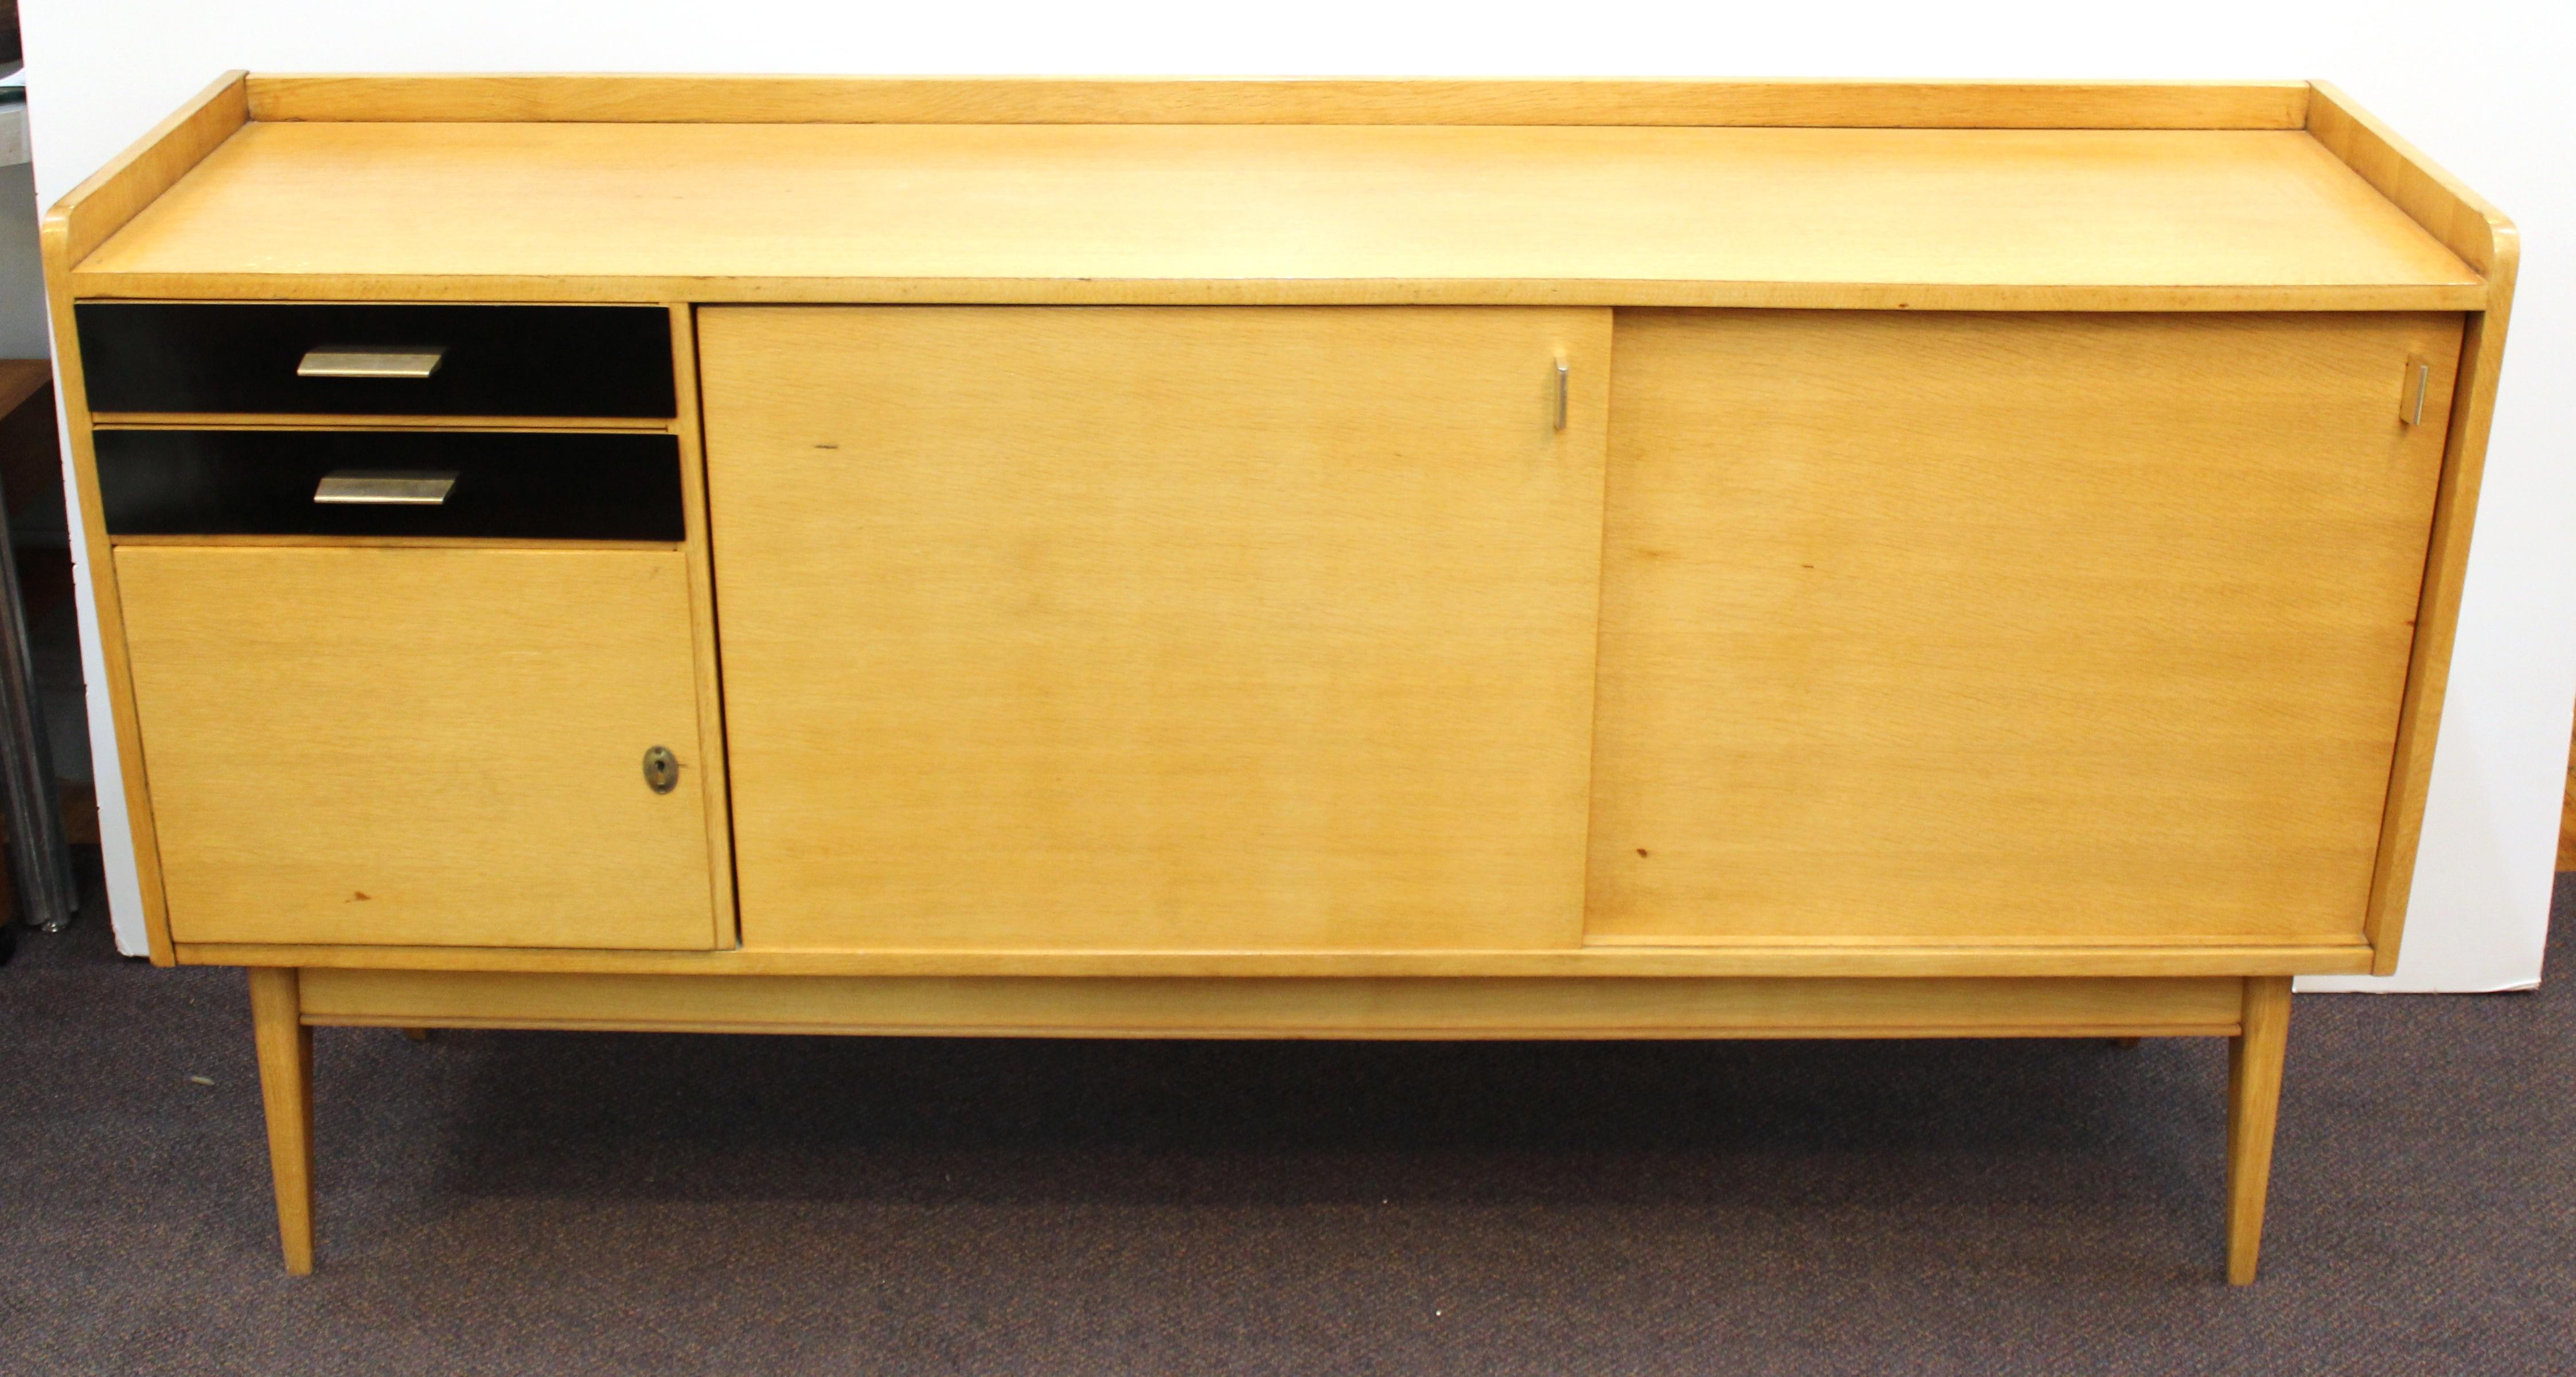 French Mid-Century Modern oak credenza or sideboard, designed by Maurice Pre, with two stacked drawers at the left side over a door and two sliding doors at the right, the sideboard raised on four splayed legs. The piece has a maker's label